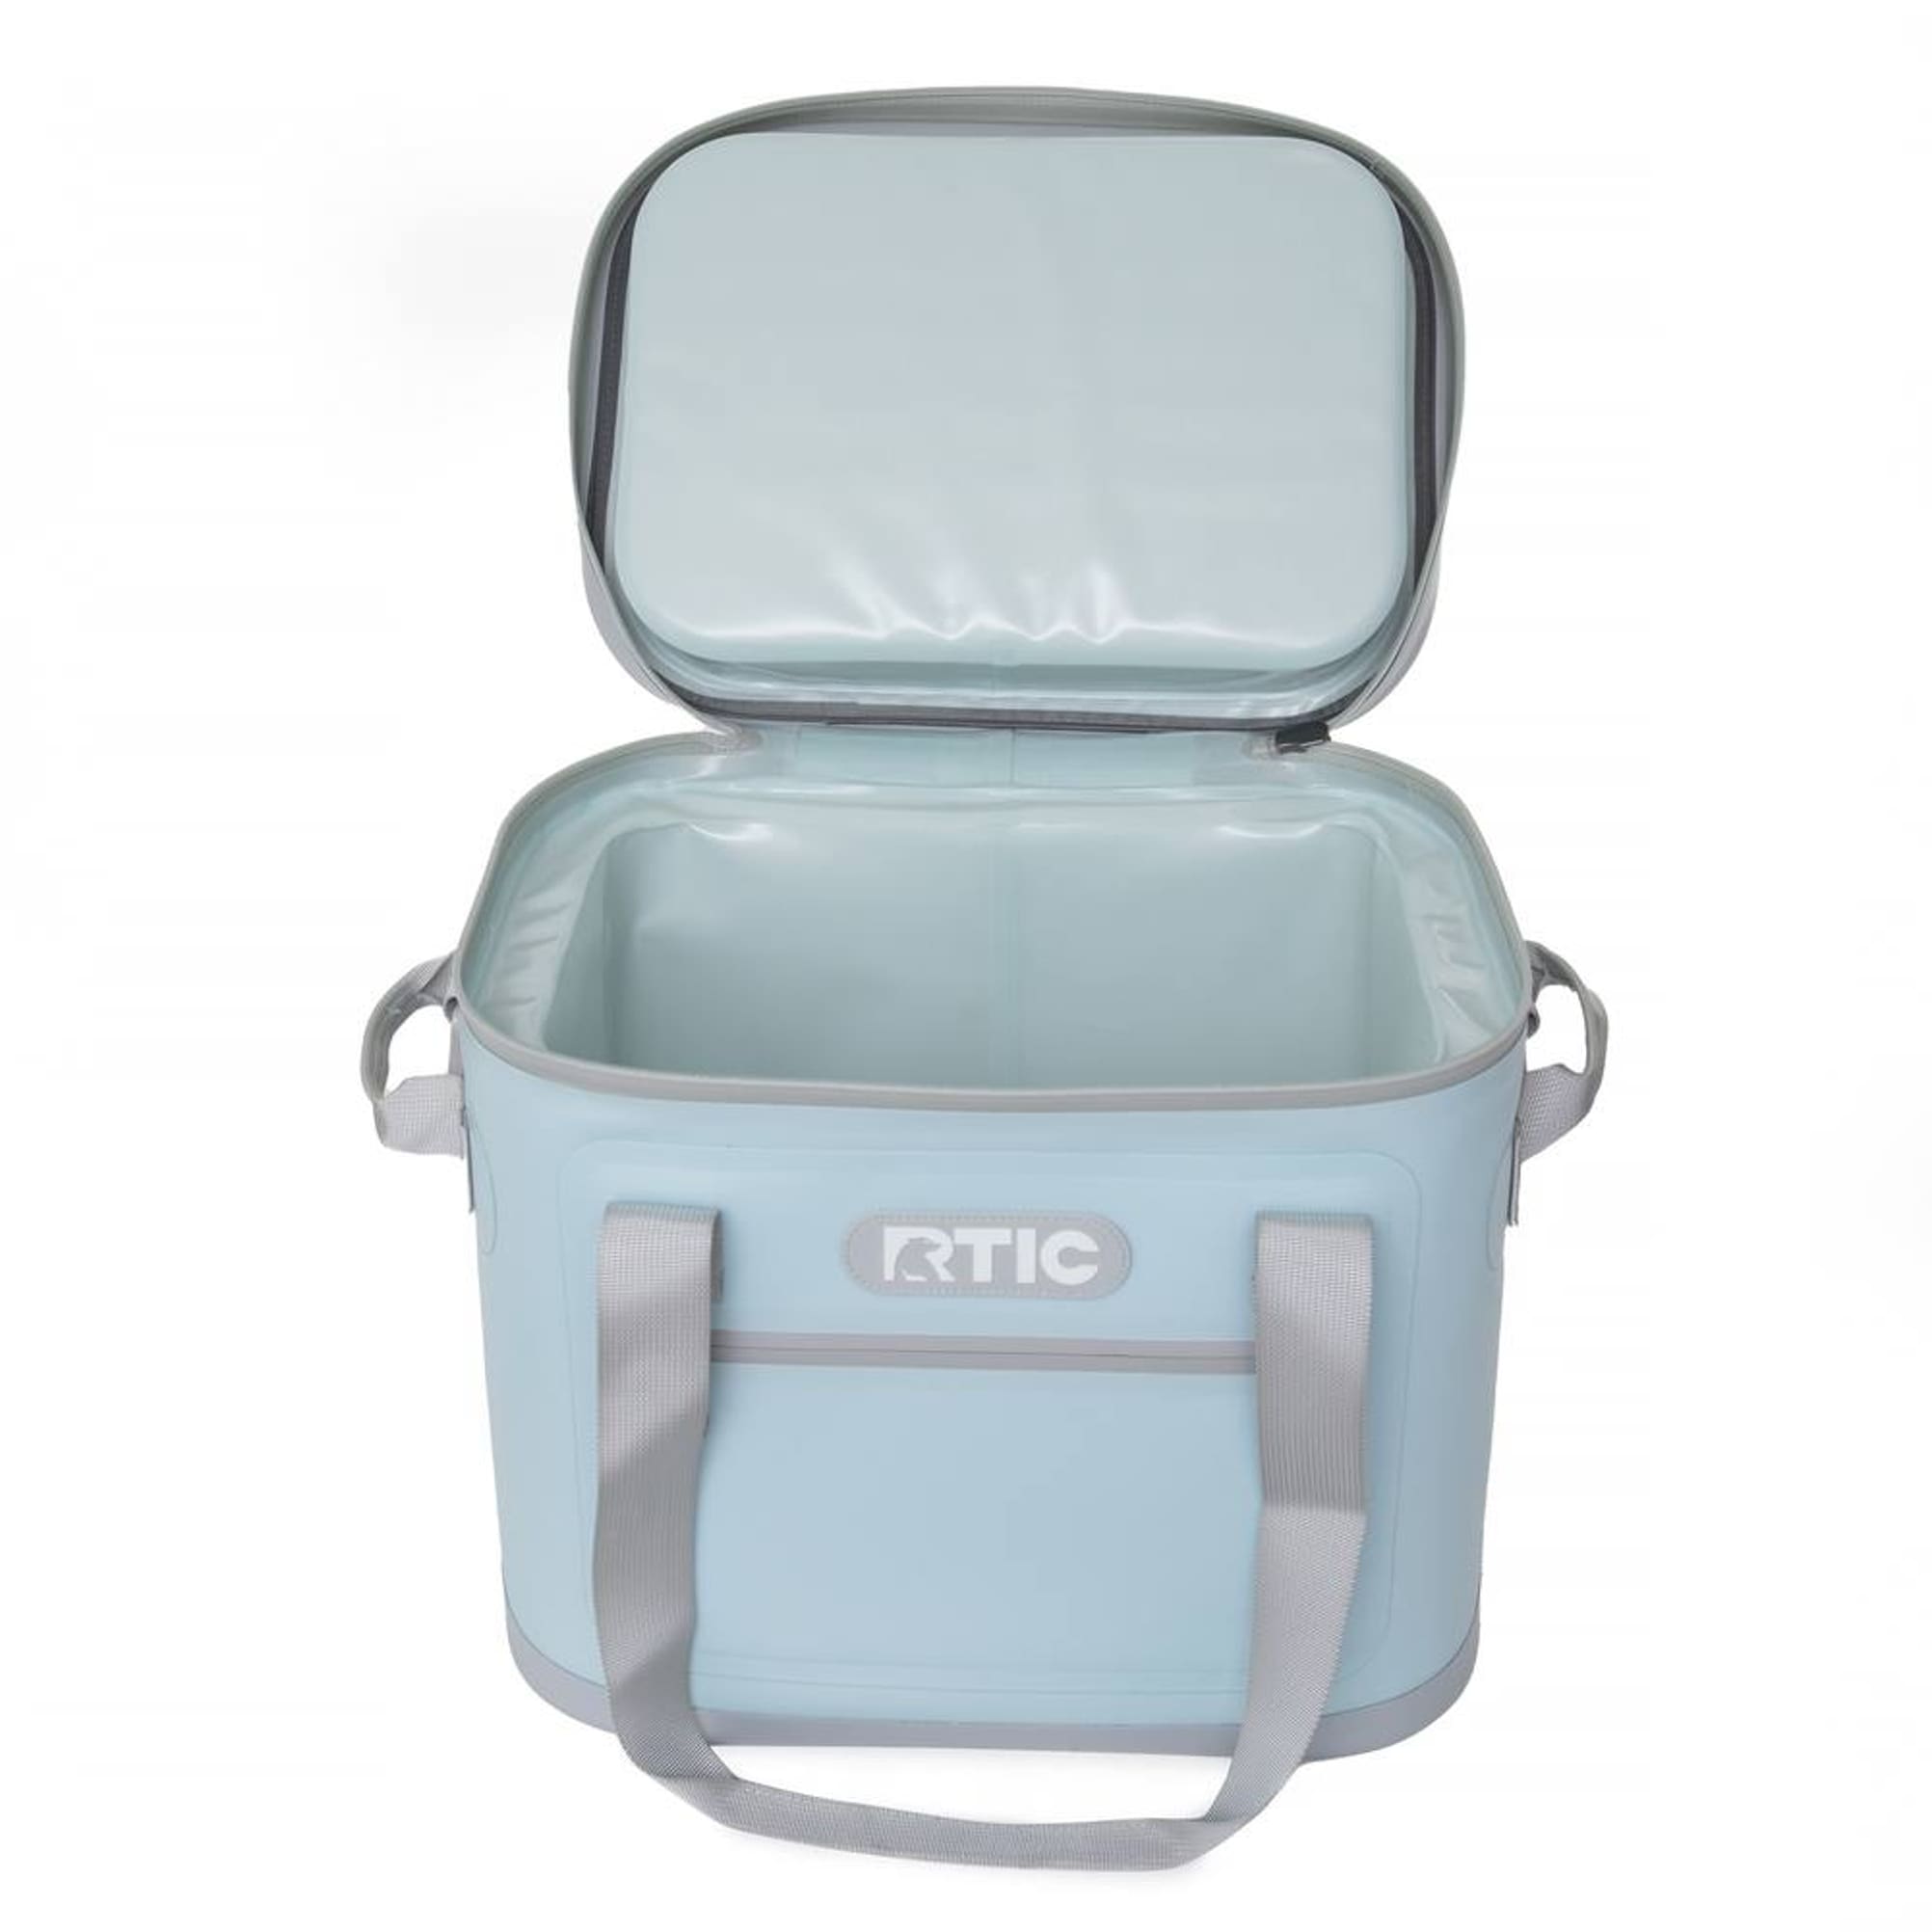 RTIC Outdoors Soft Pack Sky Blue 30 Cans Insulated Drink Carrier